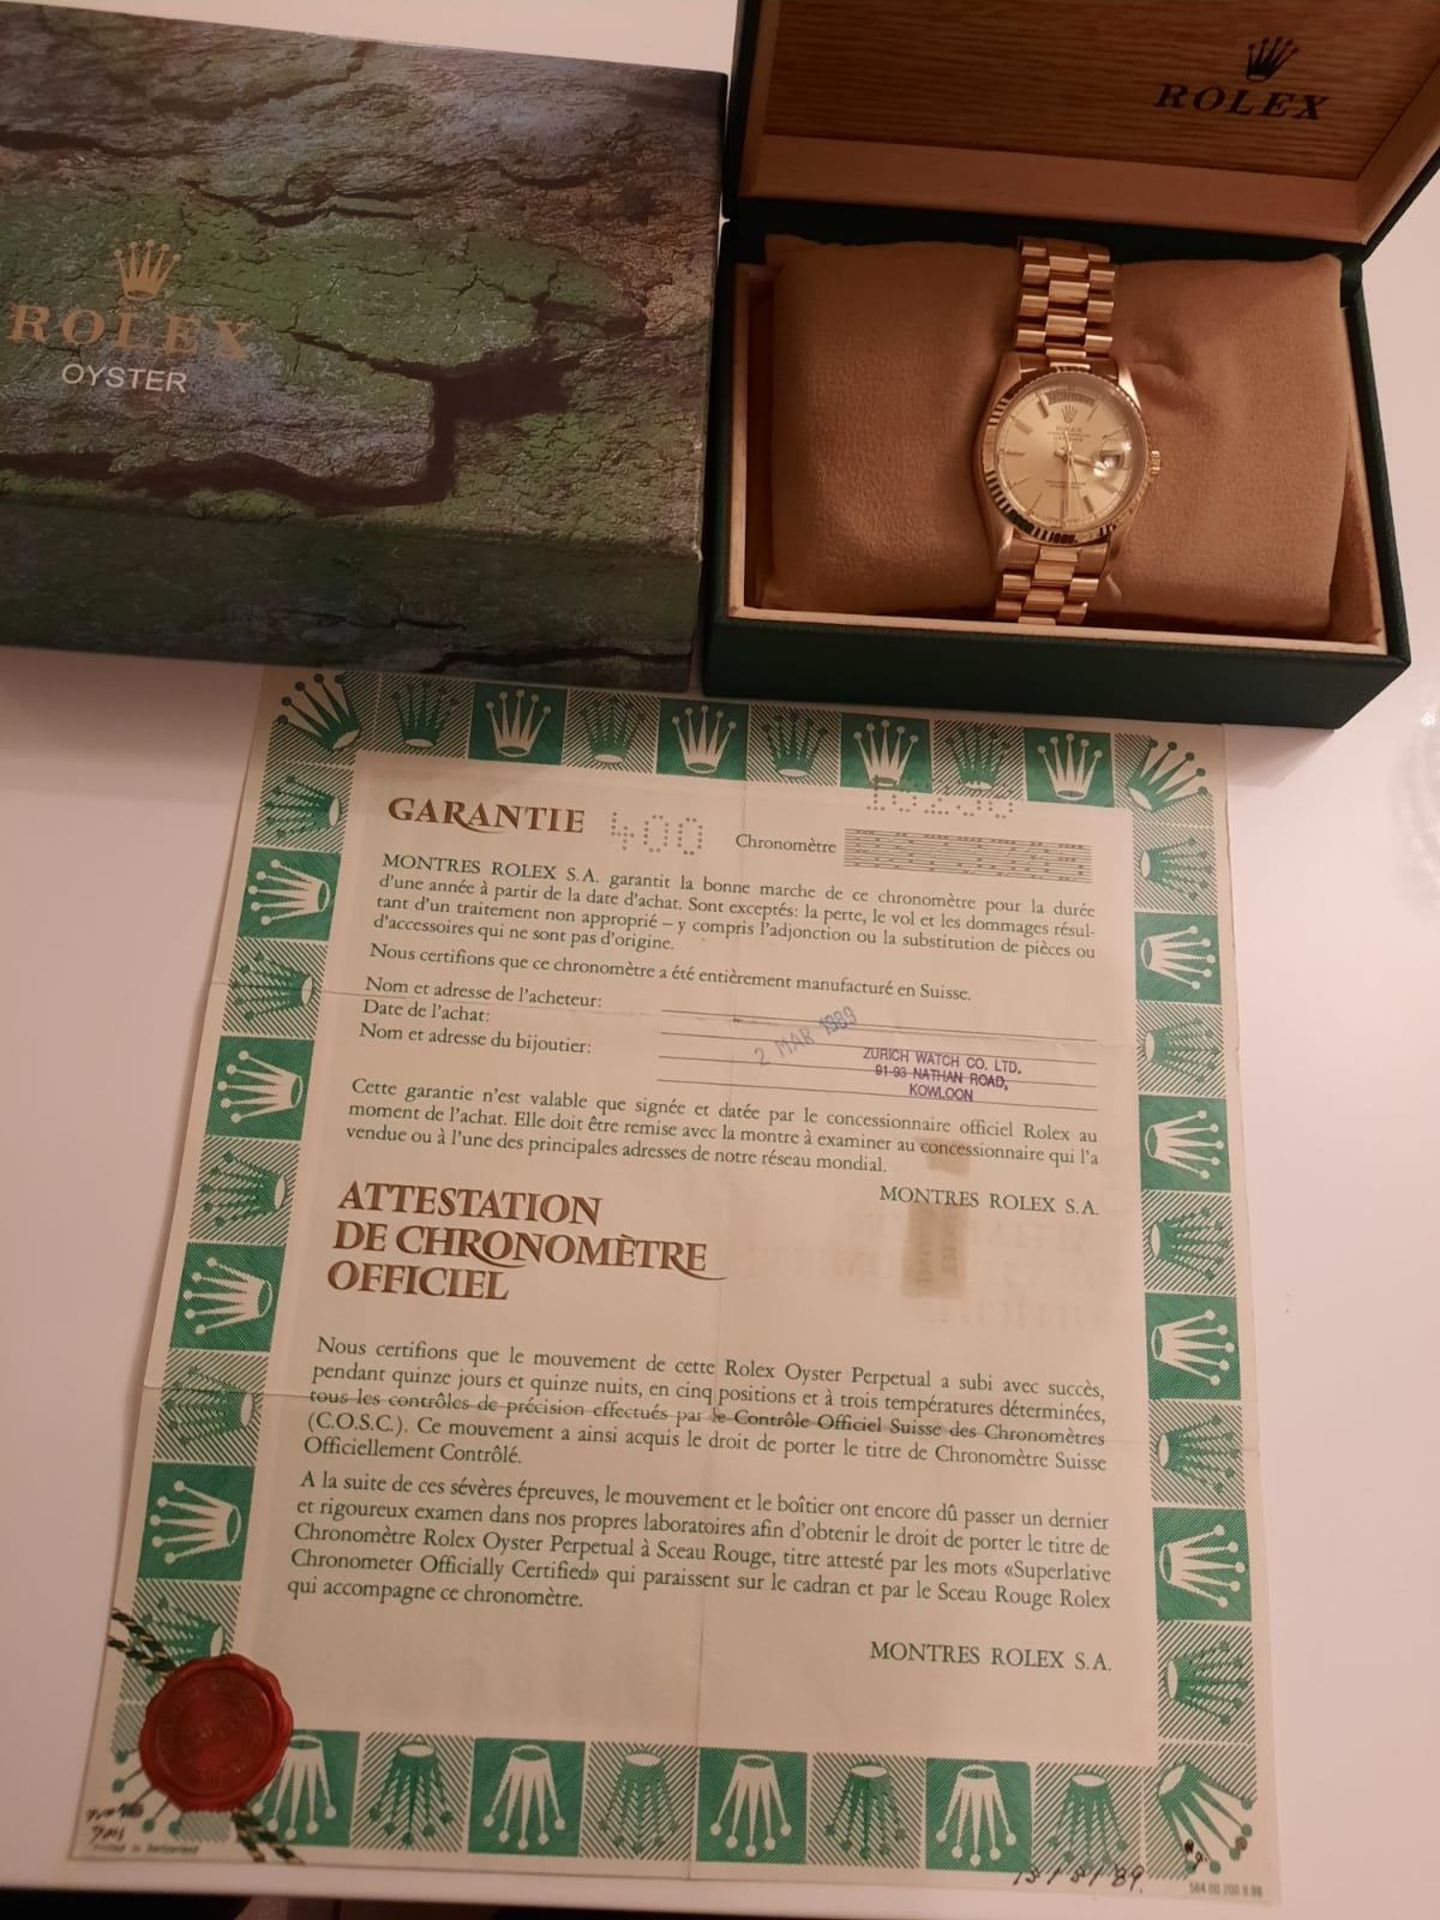 GENTS 18ct GOLD ROLEX OYSTER PERPETUAL DAY DATE WRIST WATCH WITH BOX AND PAPER WORK - Image 3 of 5